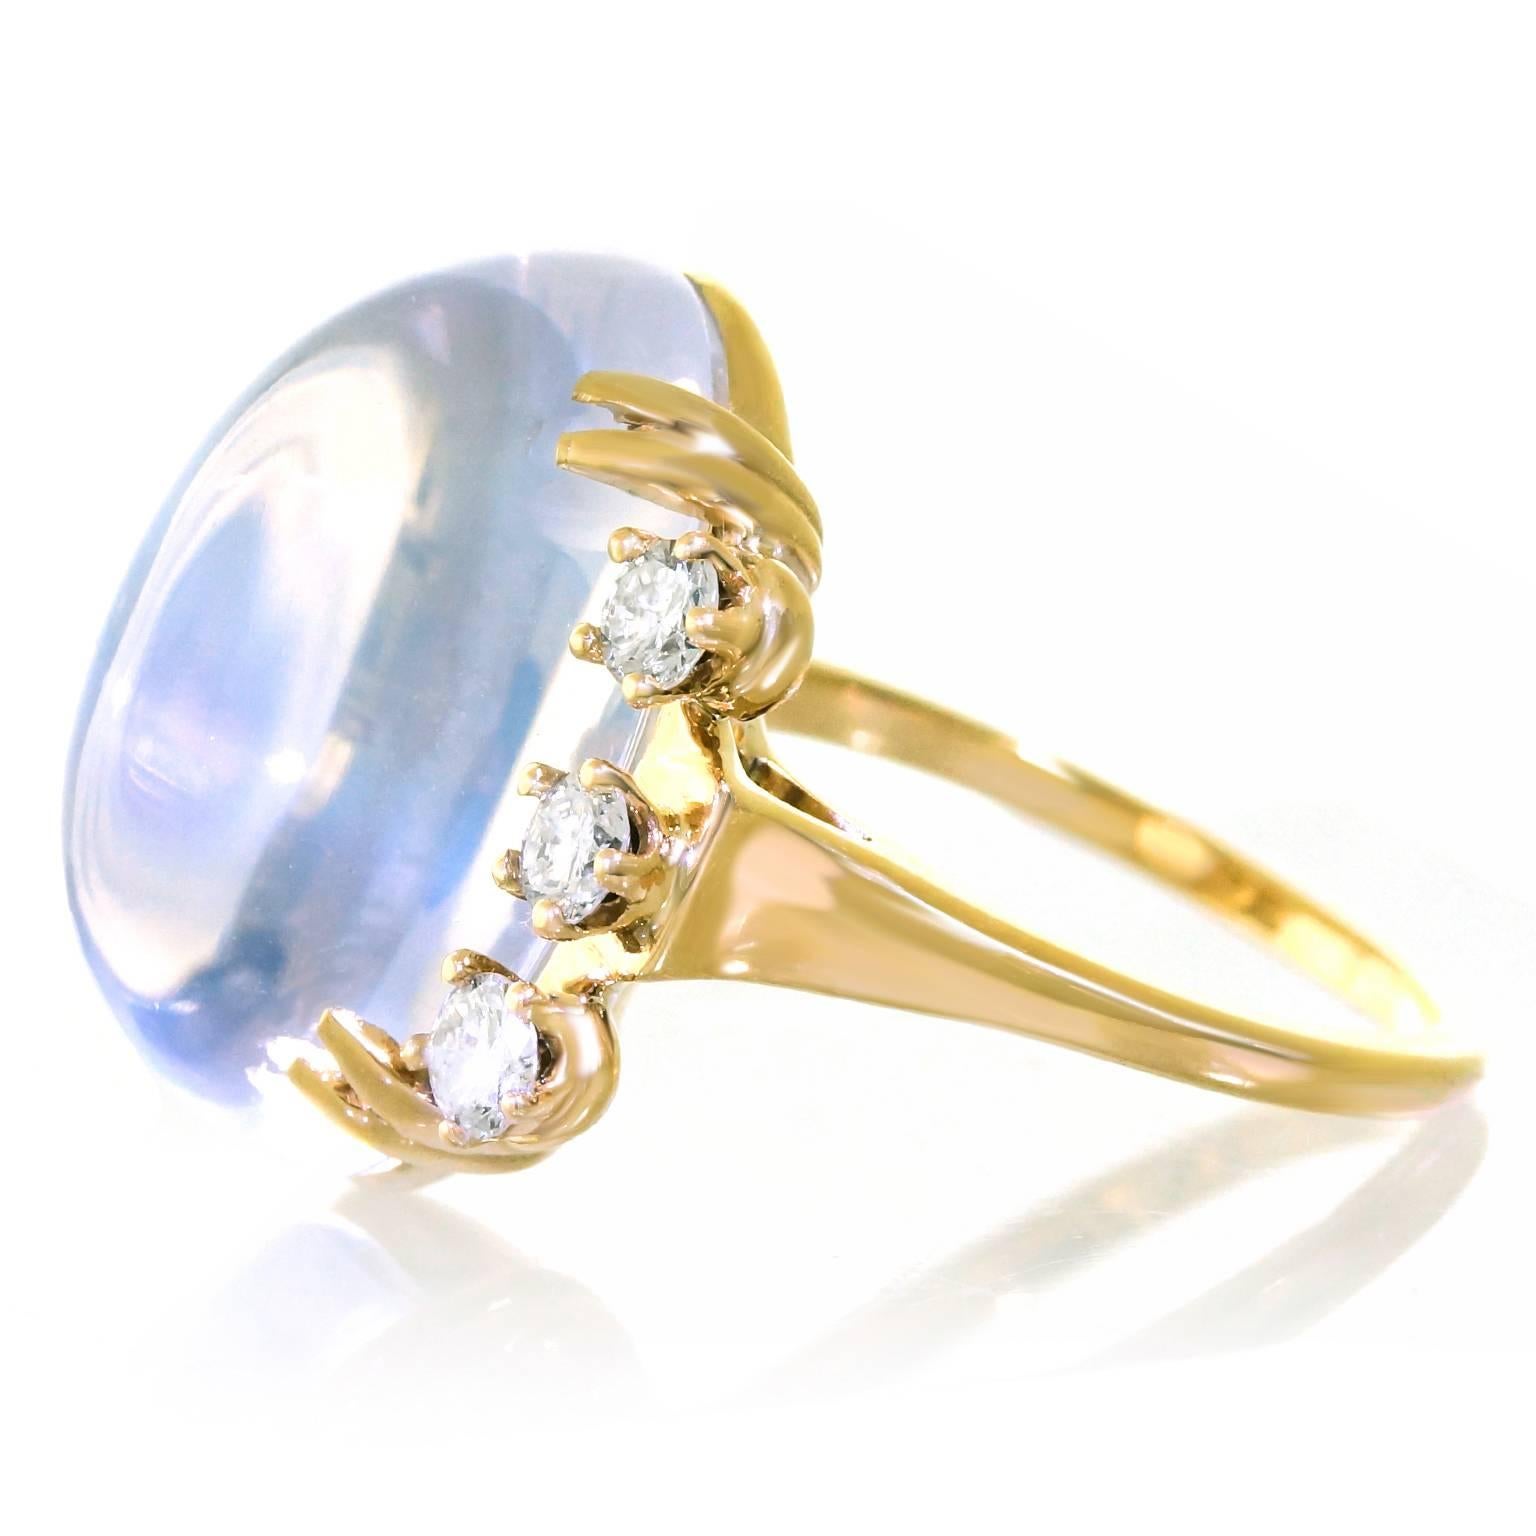 Cabochon Art Deco Gold Ring Set with 14.86 Carat Moonstone